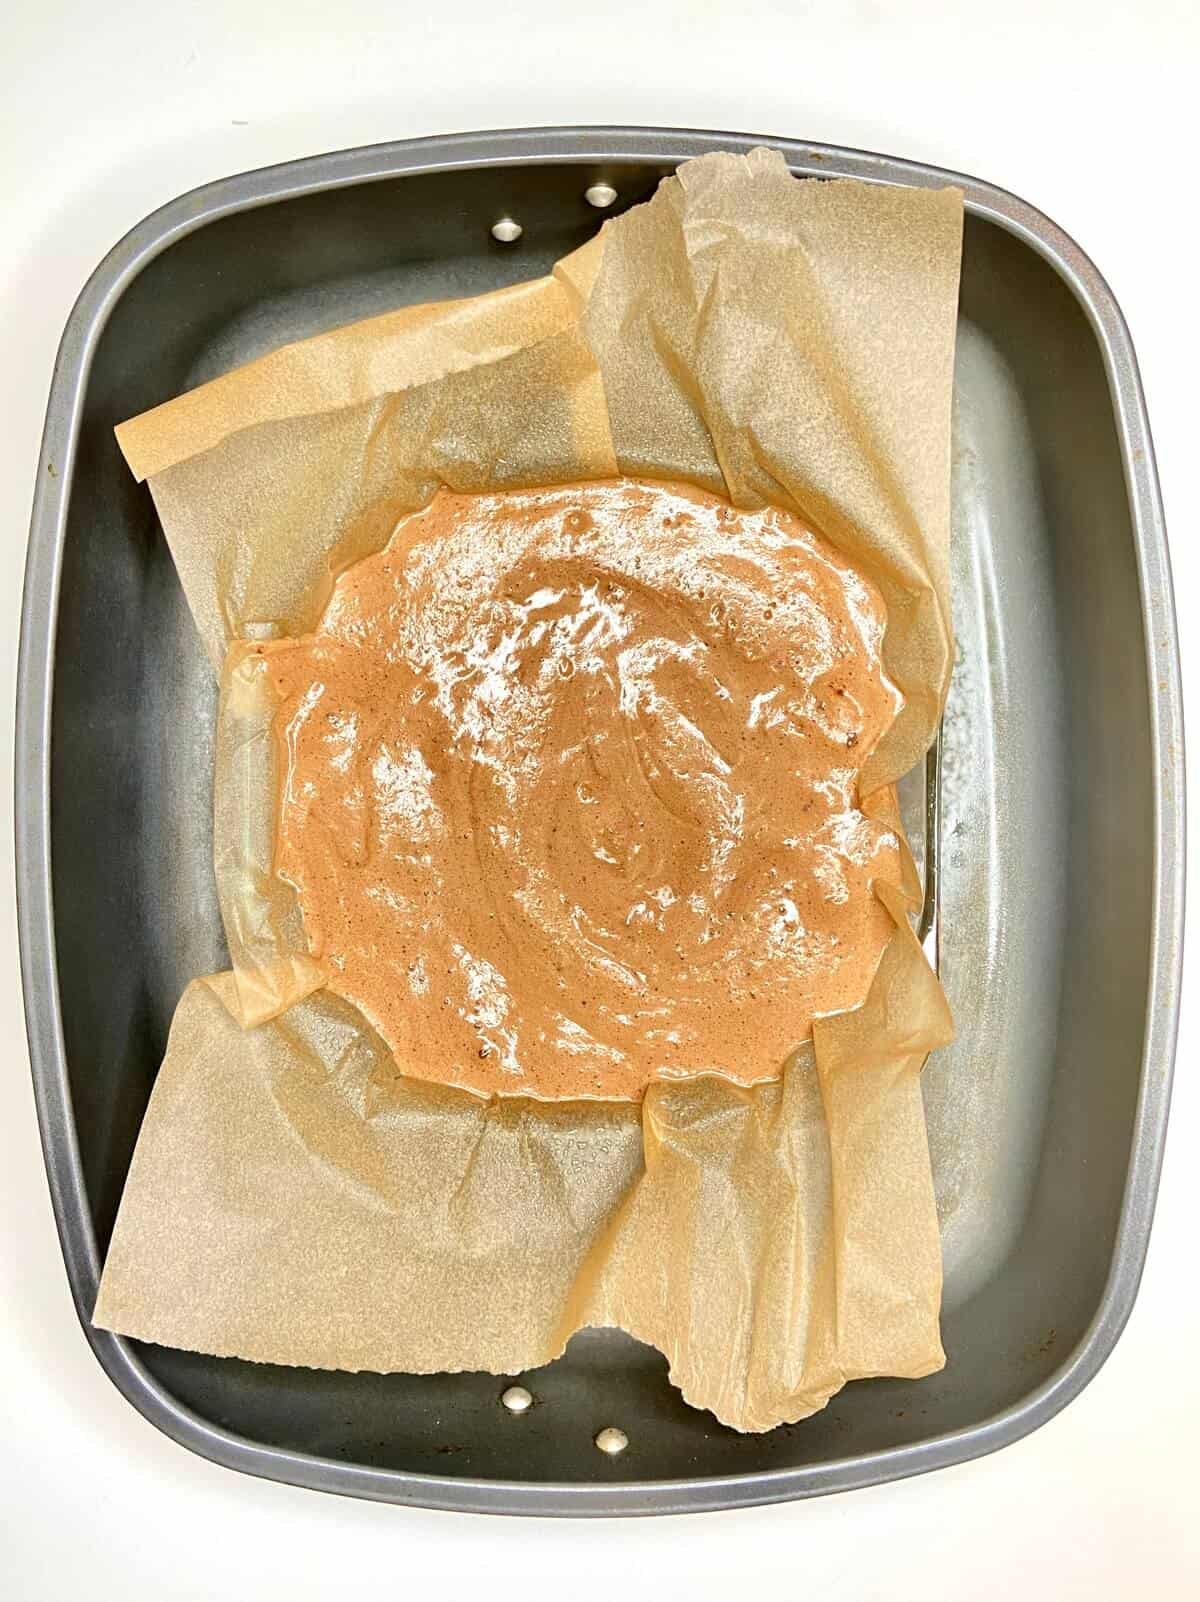 Batter poured into parchment lined baking dish, inside a larger pan for a water bath.